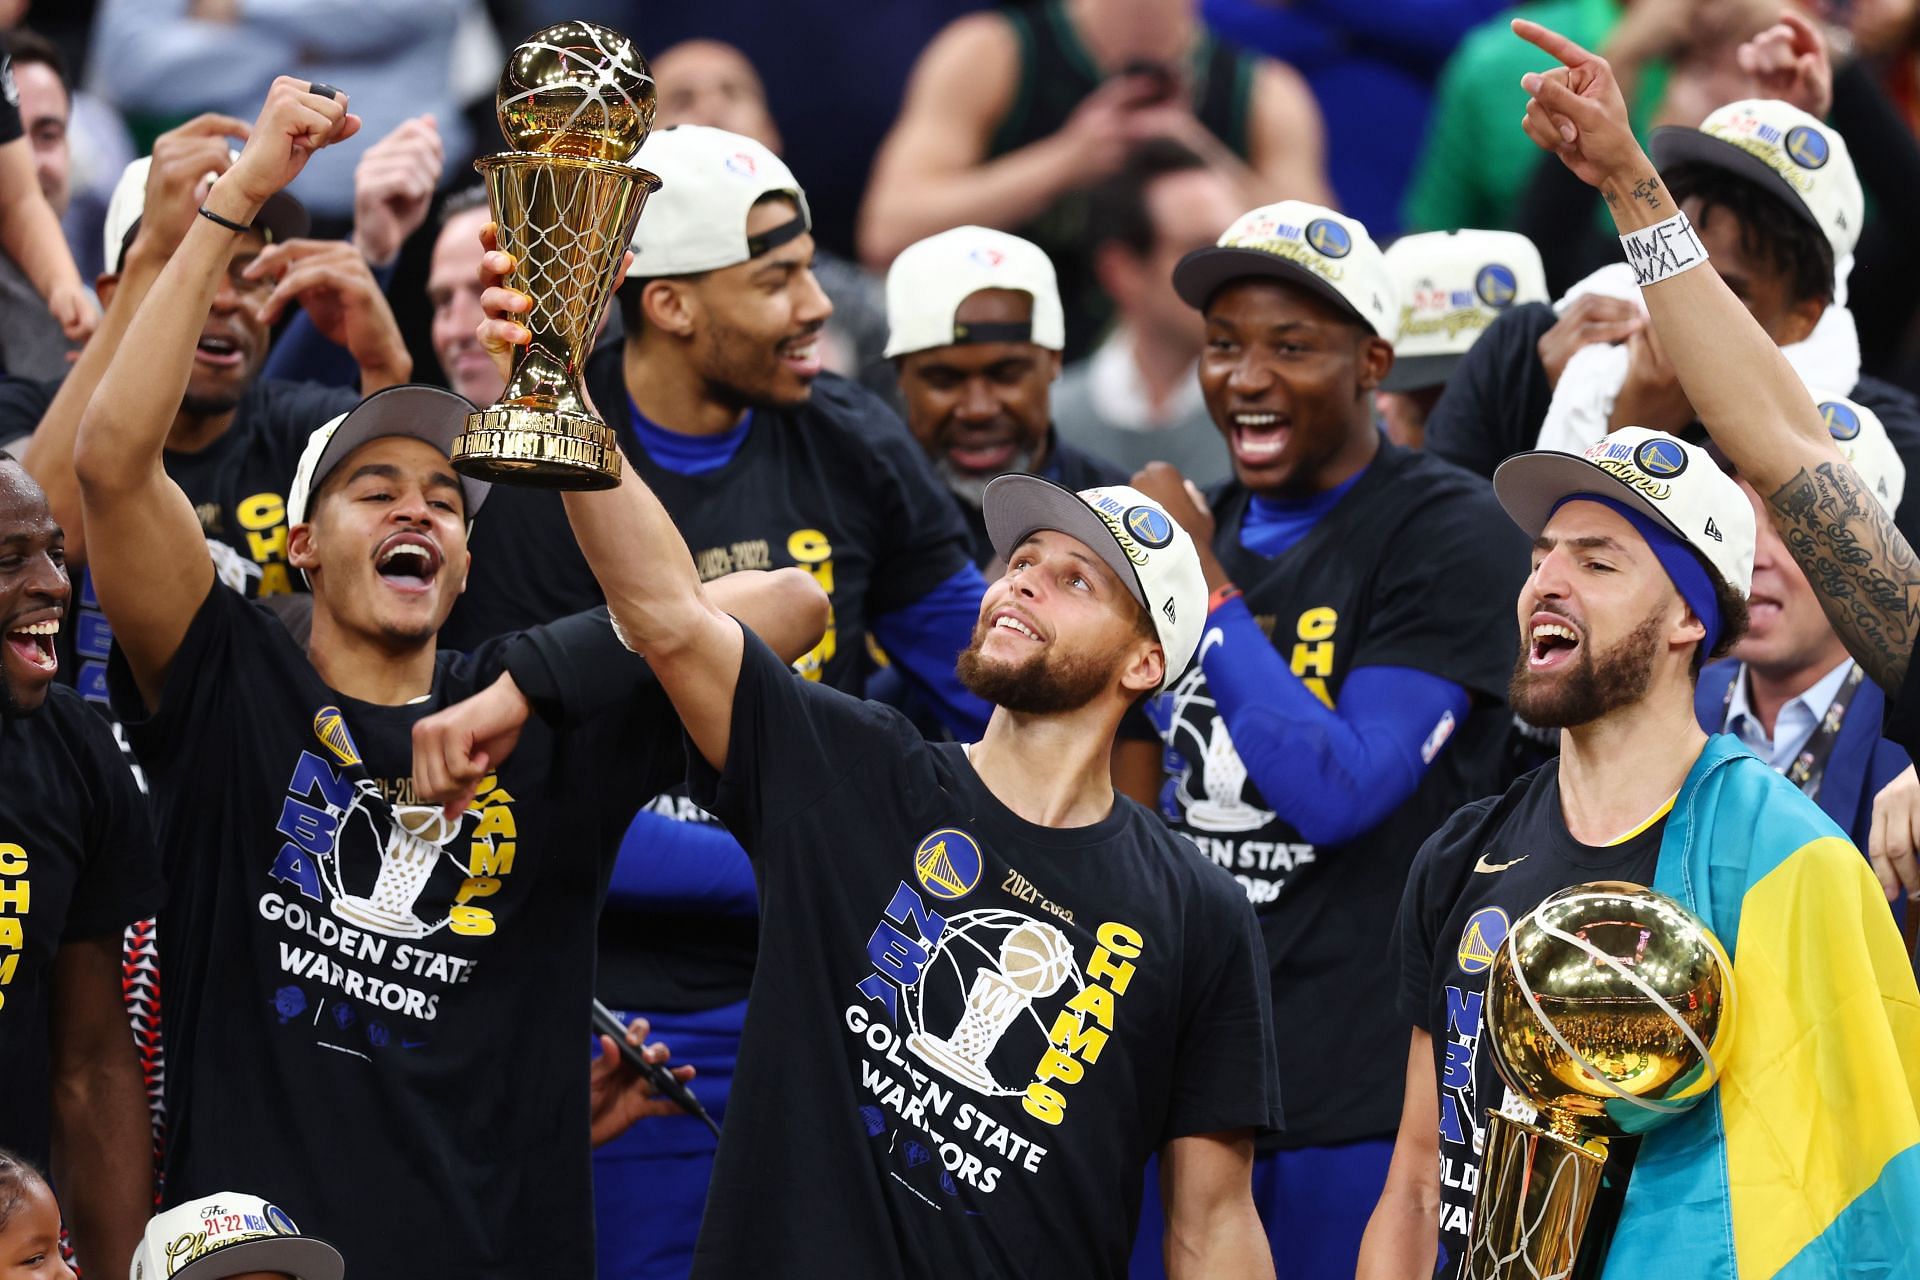 Steph Curry and the Golden State Warriors won their fourth title since 2015.